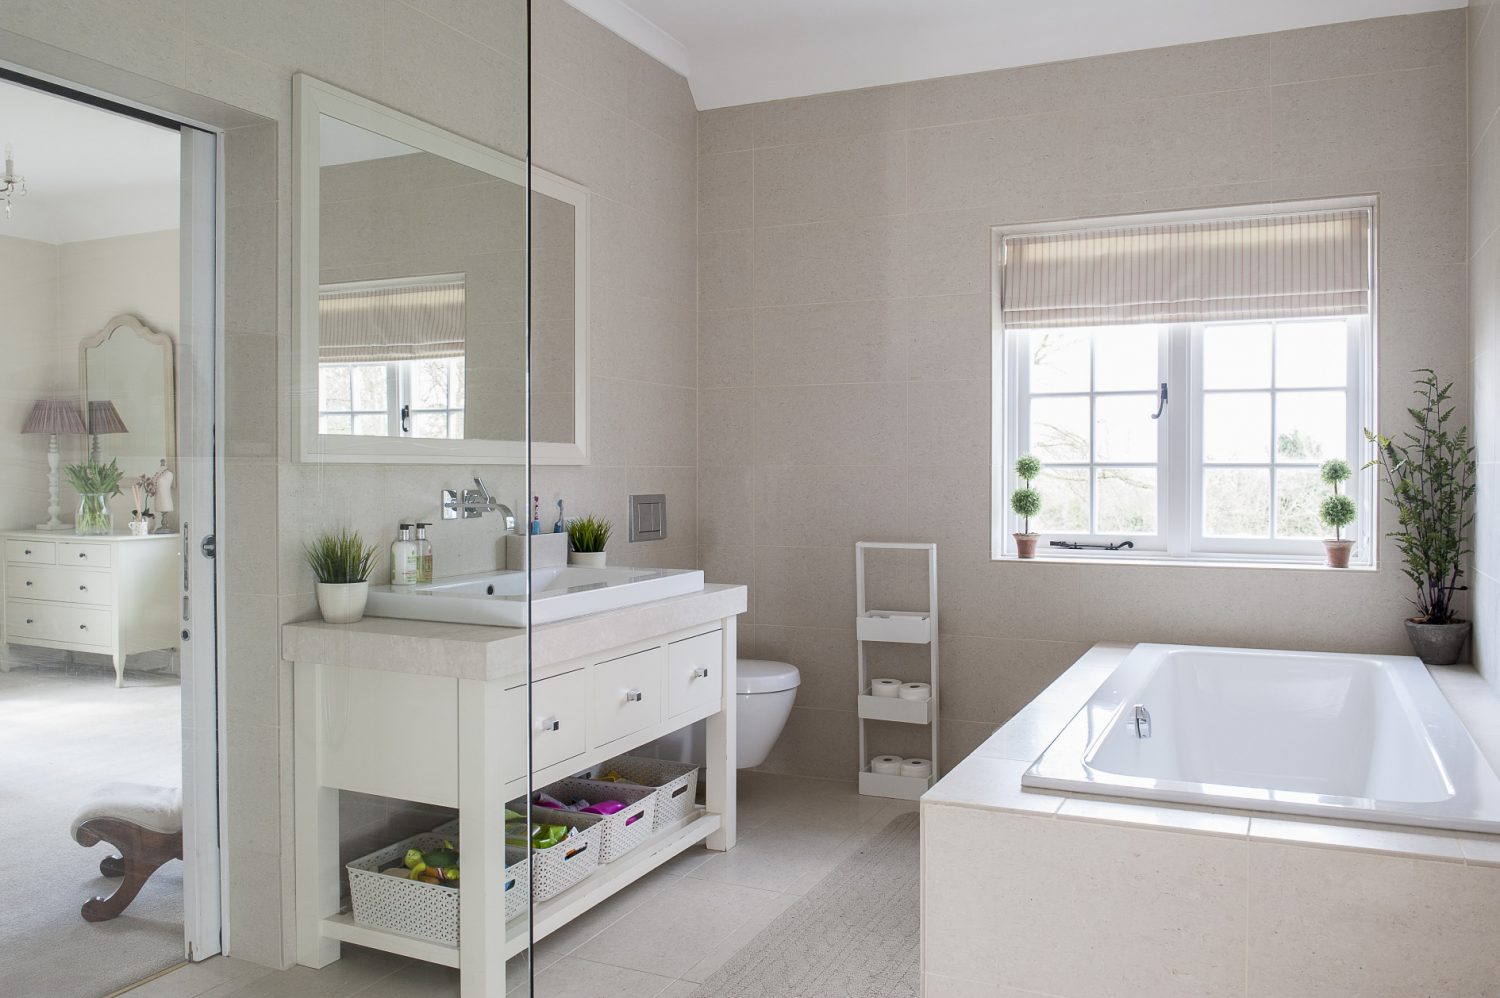 The children’s Jack & Jill bathroom has sliding doors to leave maximum space for washing. Pale travertine tiles cover the floor and walls and the room was tanked to cope with splashes from the huge bath and walk-in shower